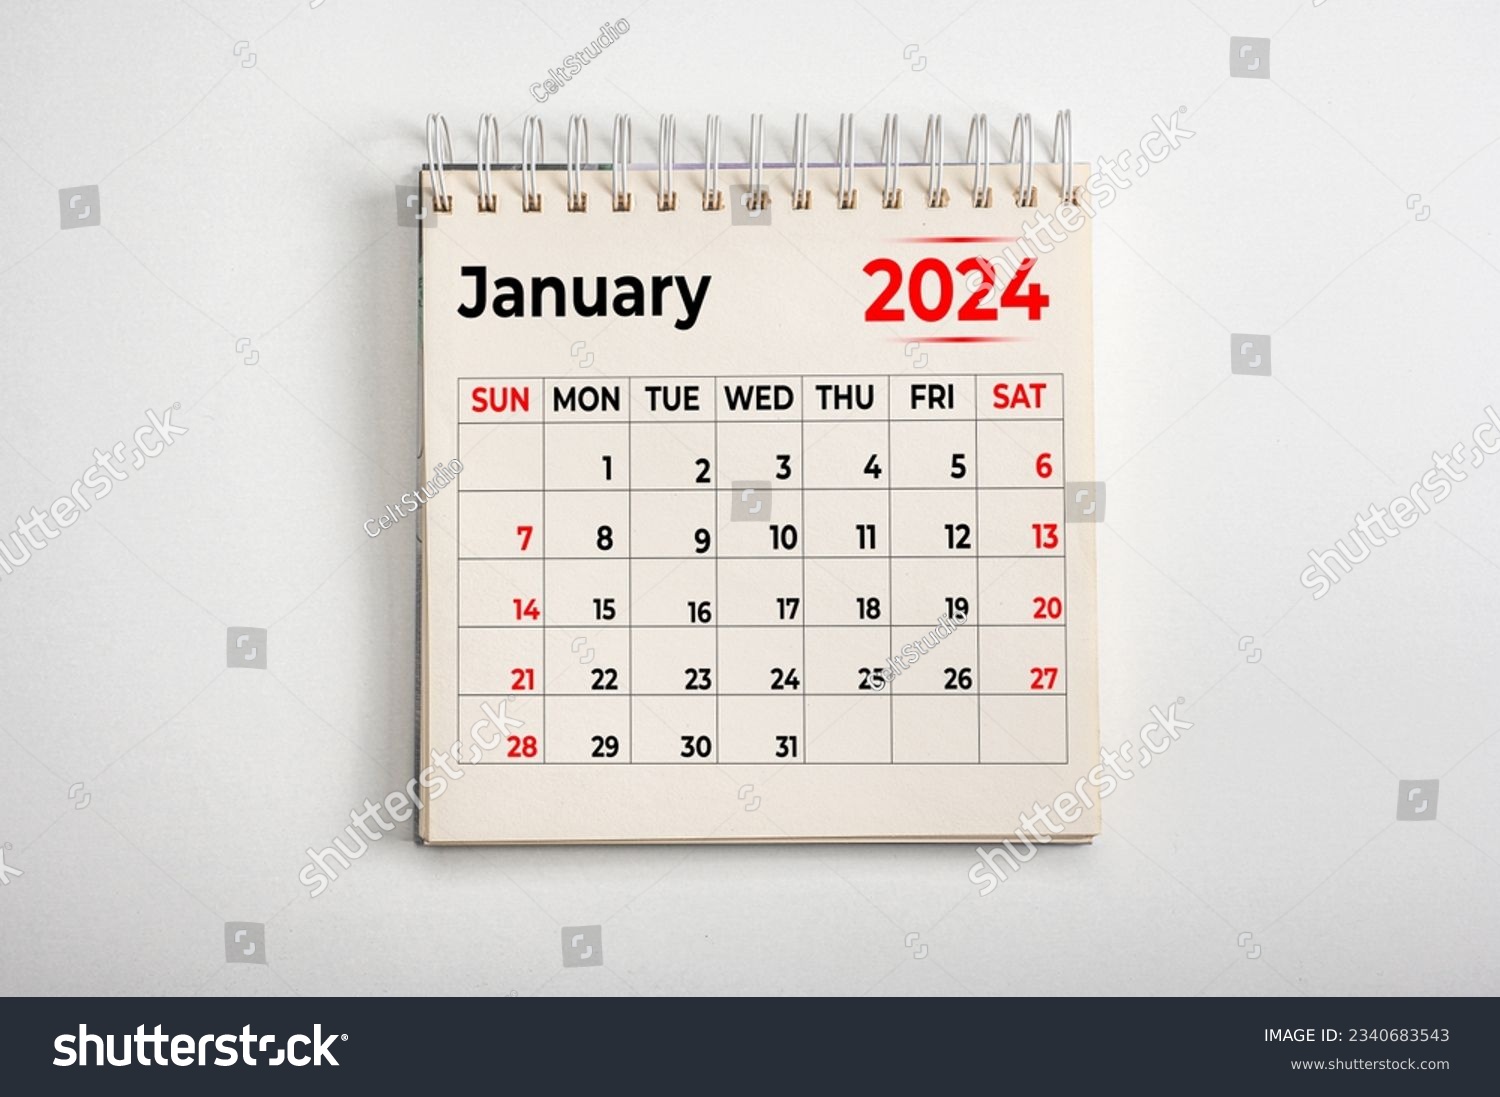 January 2024. Resolution, strategy, solution, goal, business and holidays. Date - month January 2024. Page of annual monthly calendar - January 2024 #2340683543